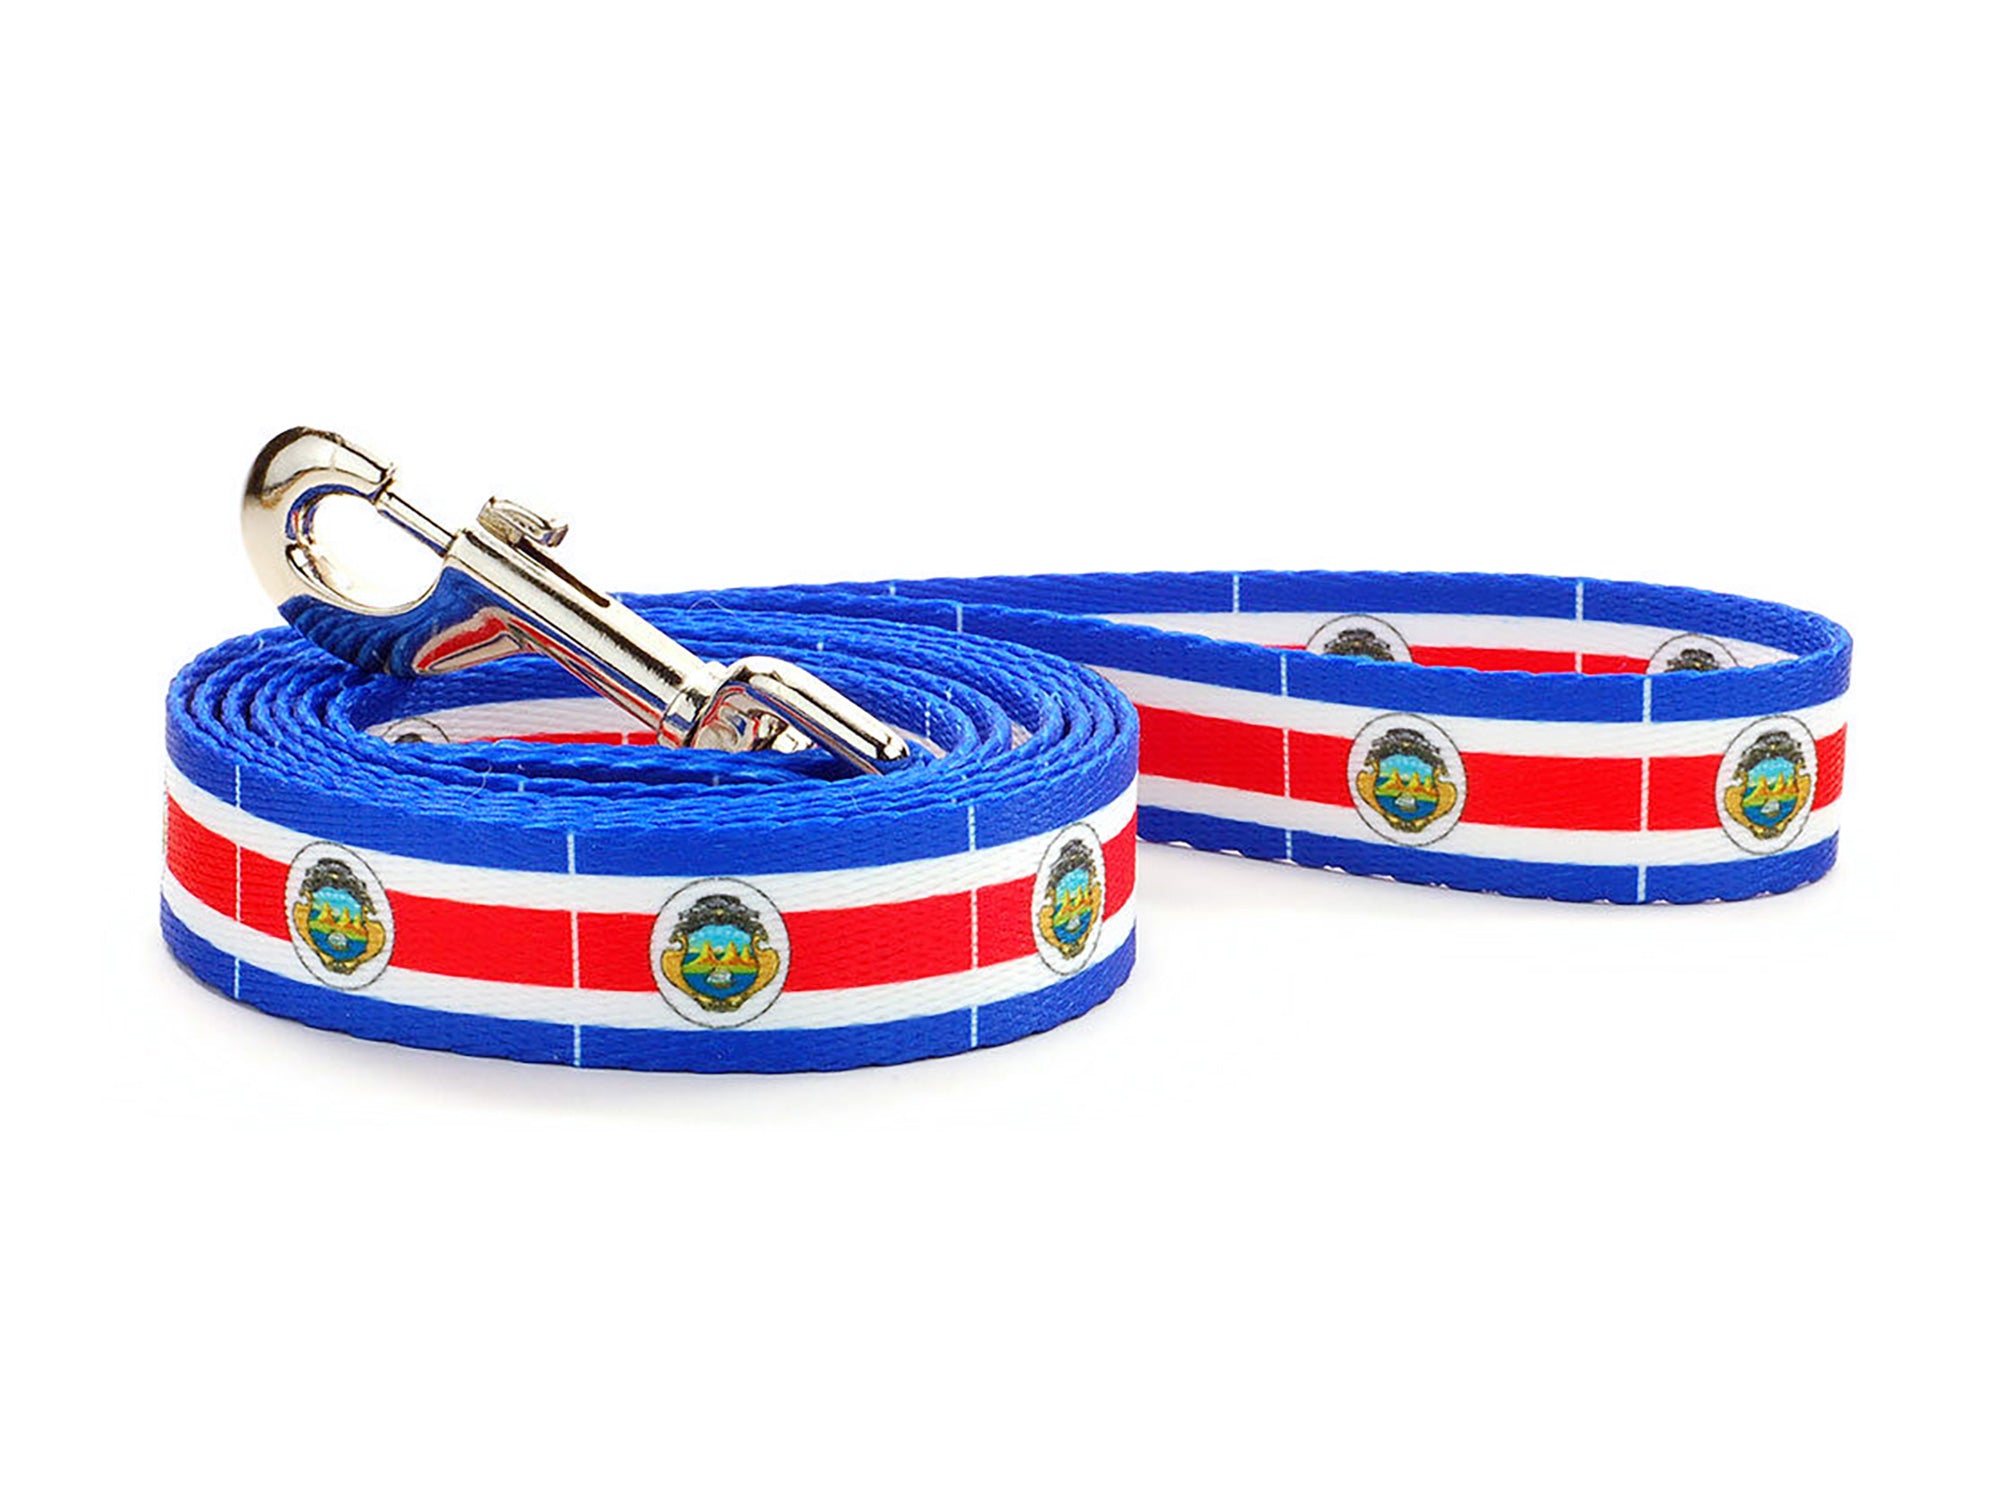 Costa Rica Dog Leash | 4 Foot and 6 Foot Lengths | Made in USA